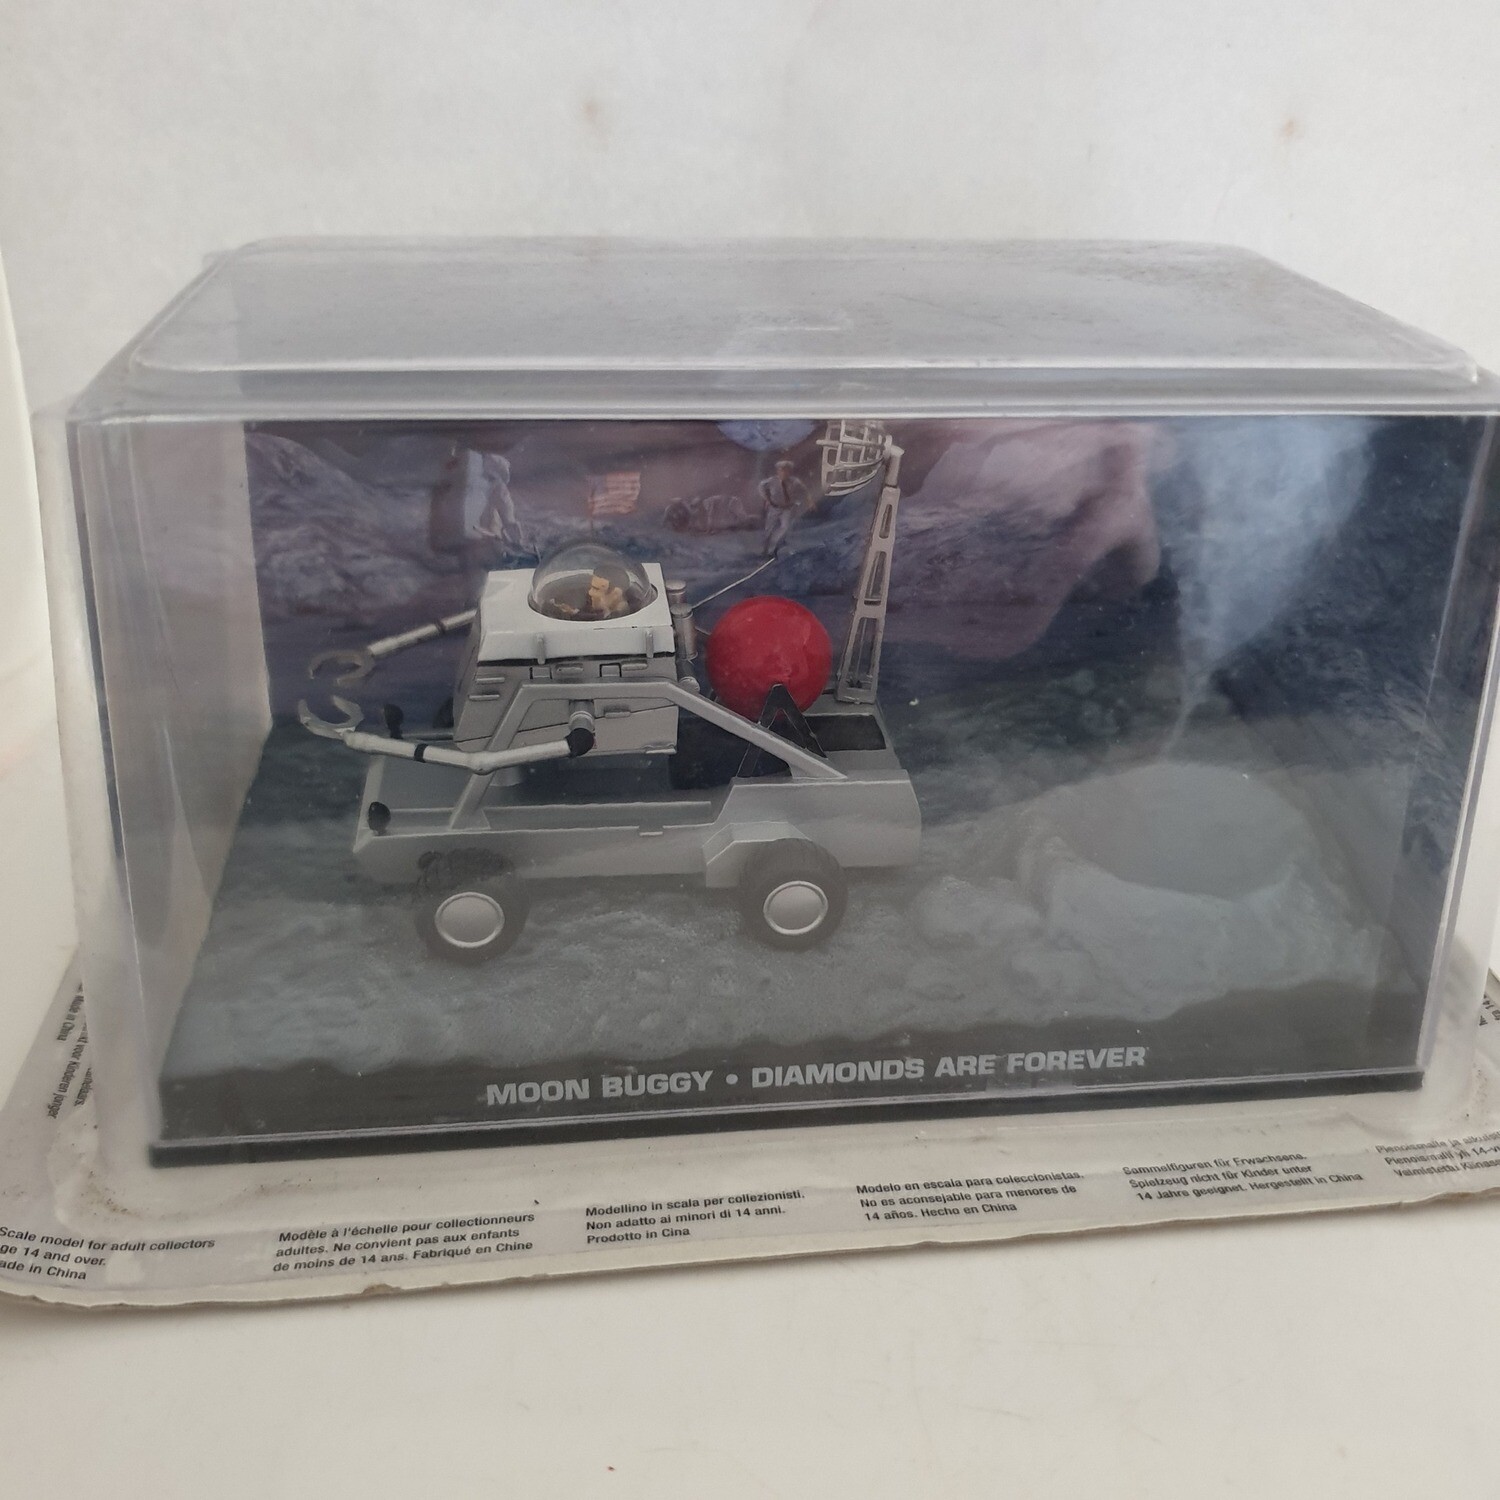 007 James Bond Moon Buggy - Diamonds are Forever - Scale Aprox. 1/43 (XX158)